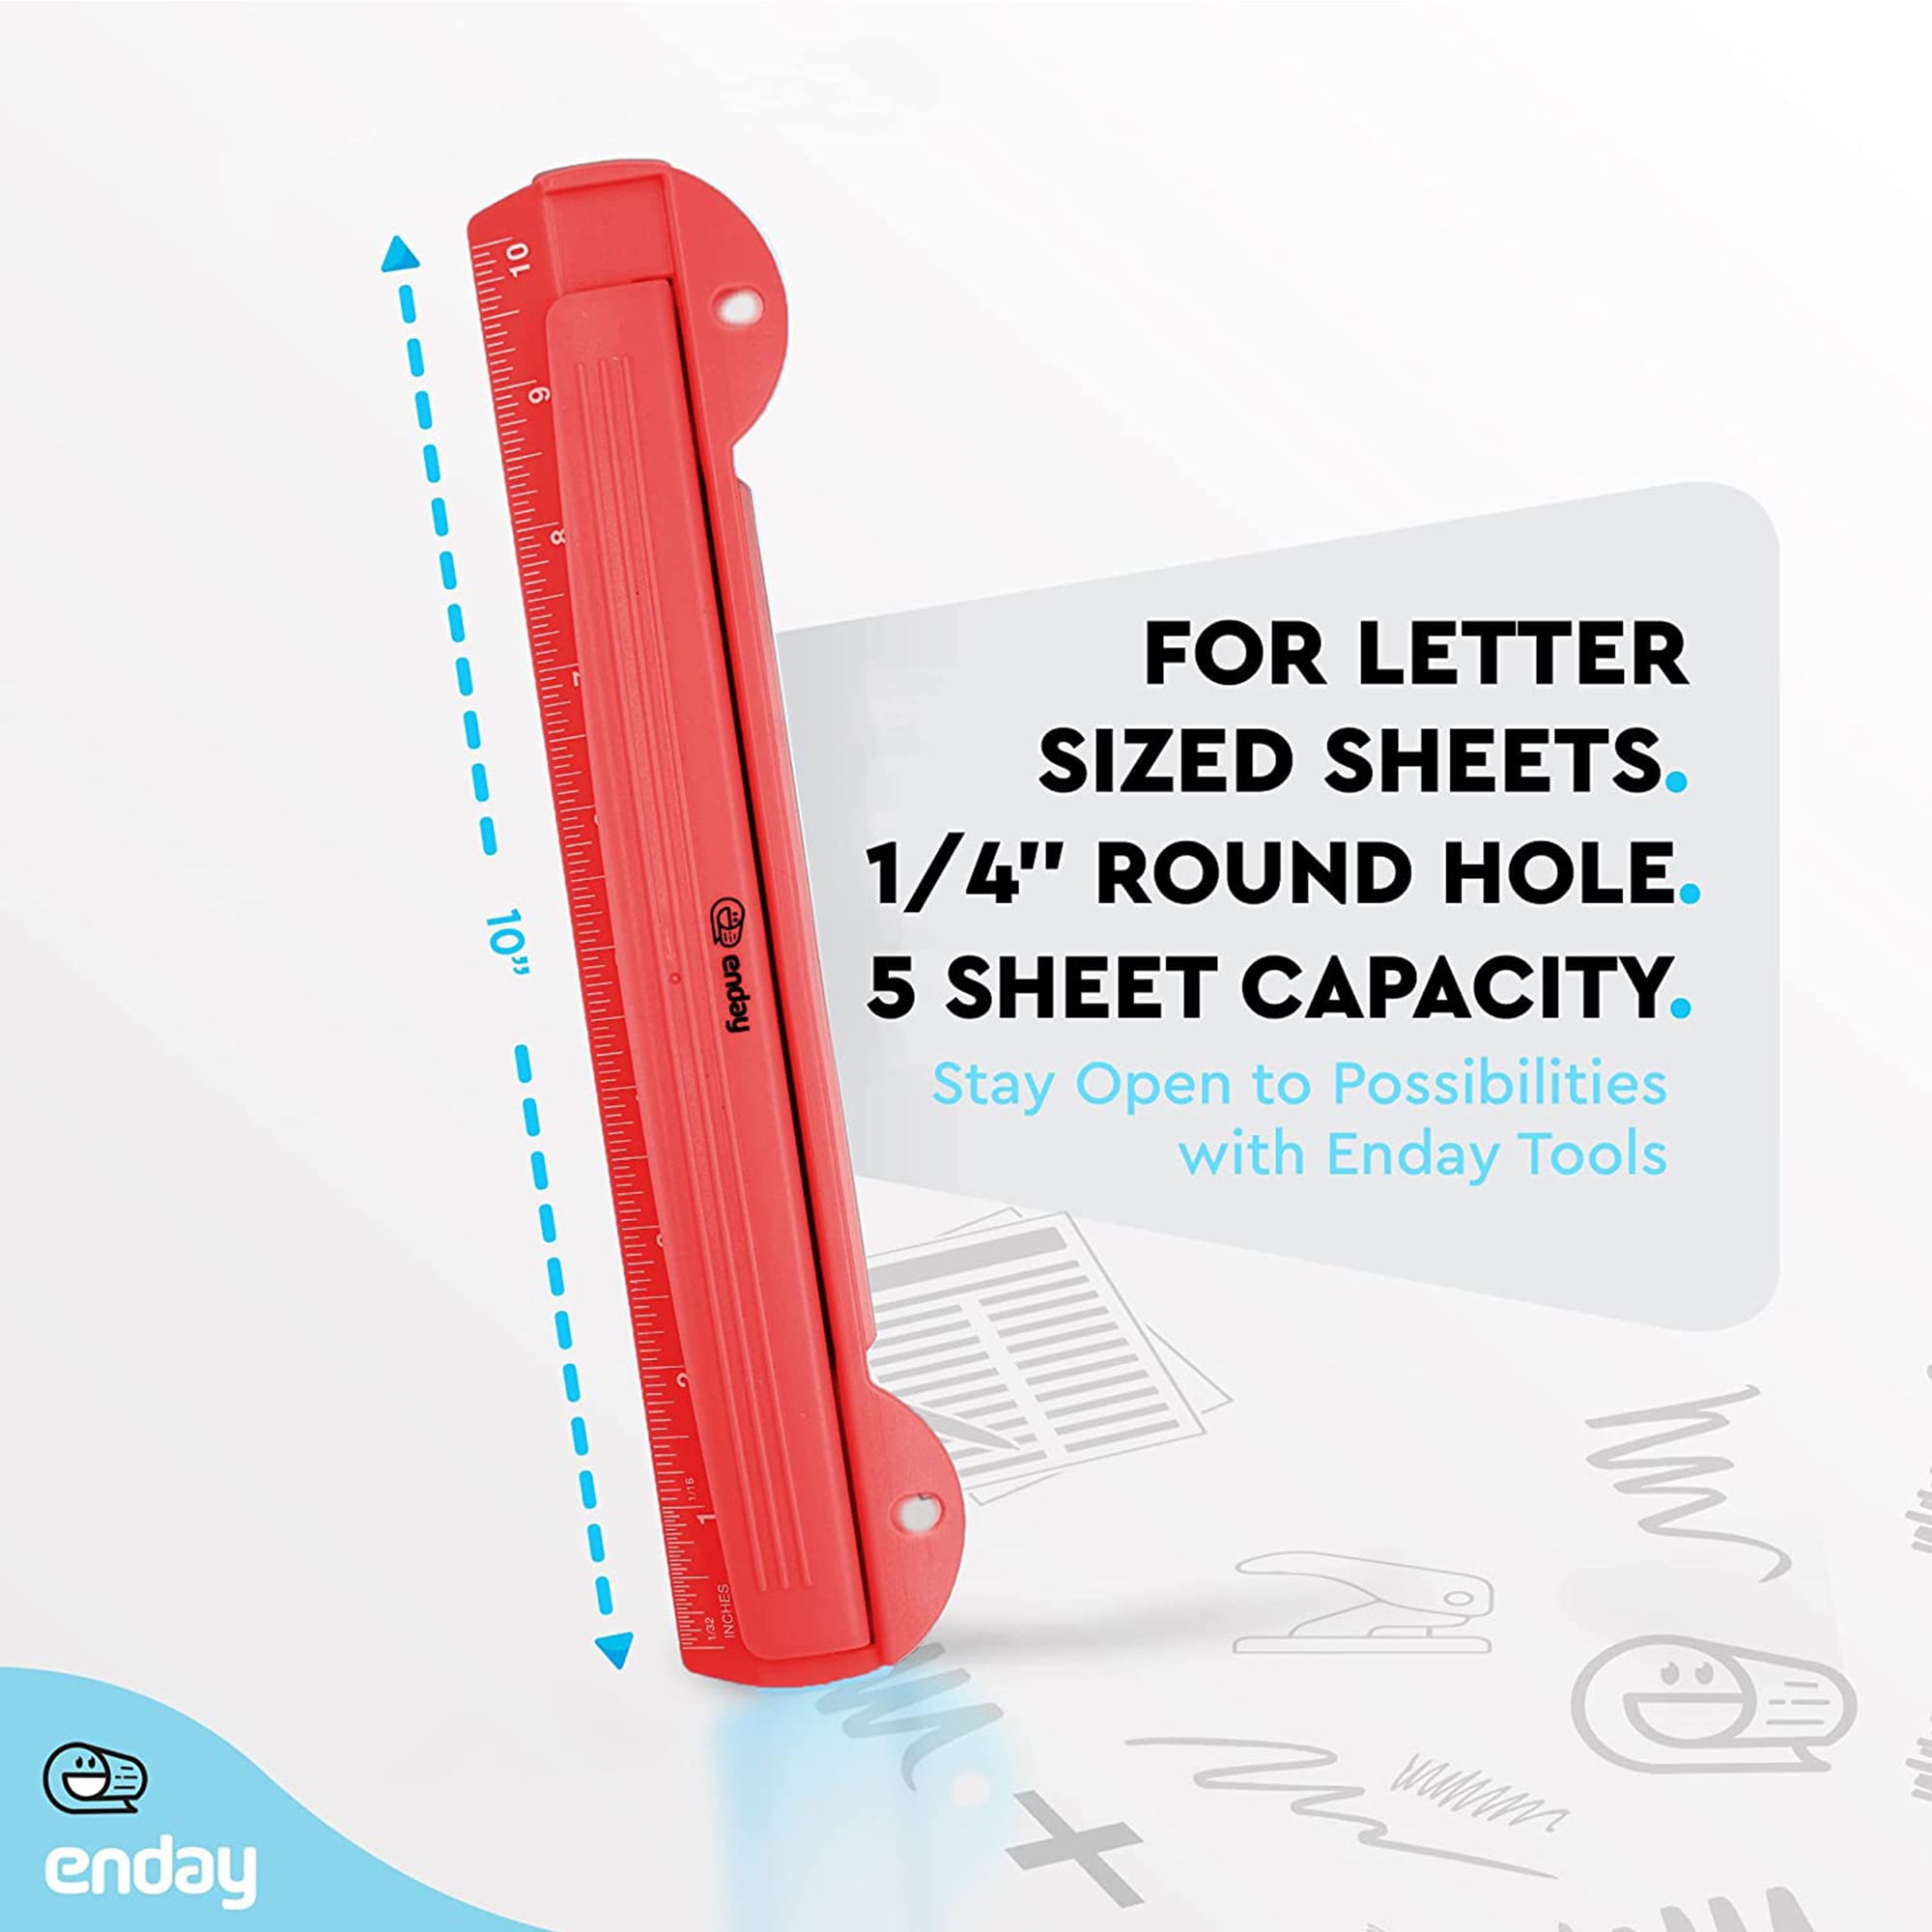 3 Hole Punch Red, Portable Hole Puncher for 3 Ring Binder, 5 Sheets Capacity, Removable Chip Tray, 10A Ruler for School, Office, Also Available in